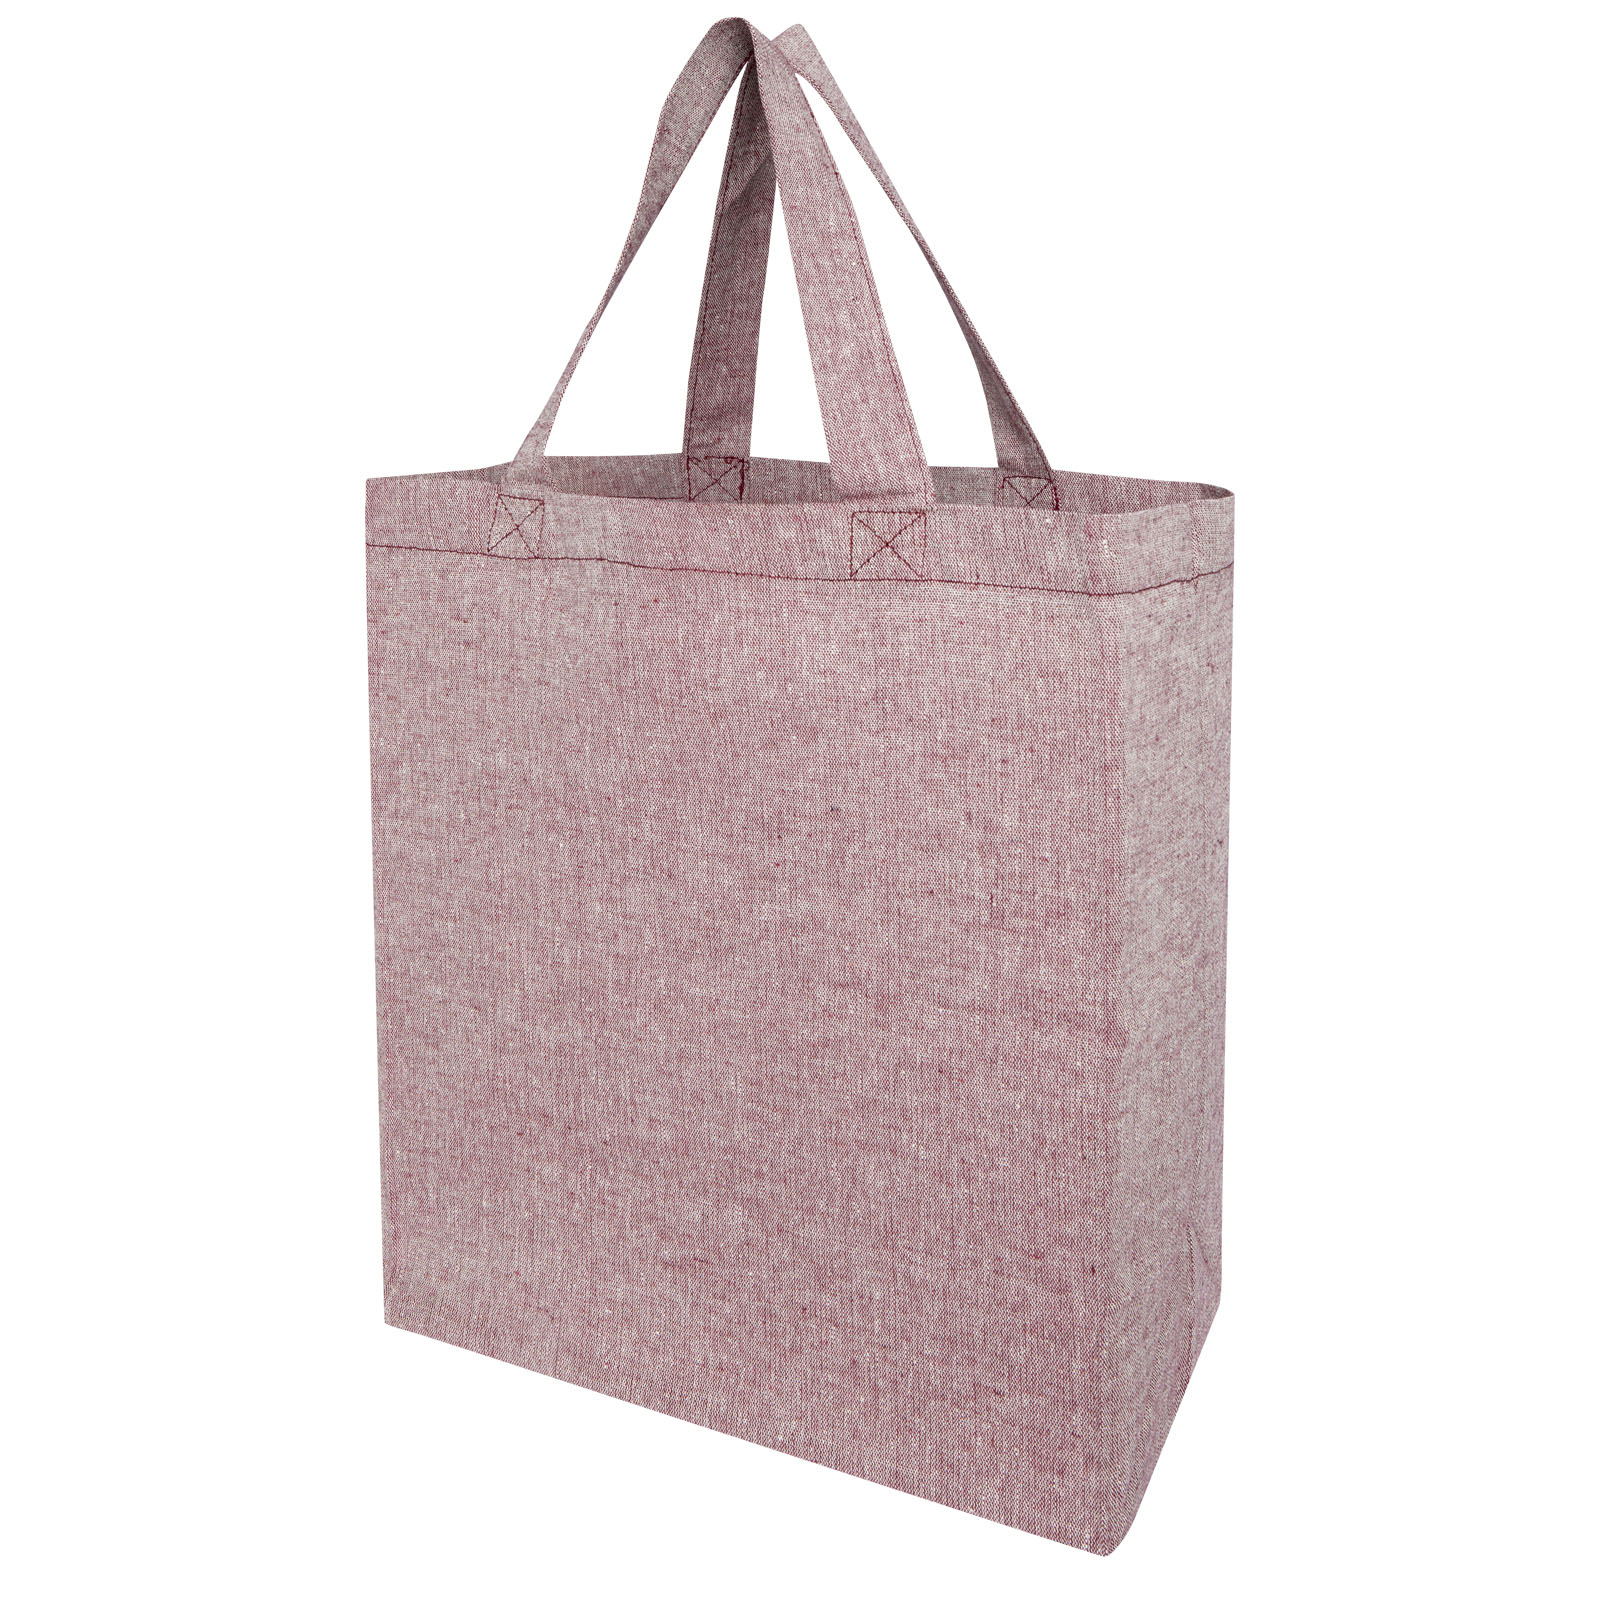 Advertising Shopping & Tote Bags - Pheebs 150 g/m² recycled gusset tote bag 13L